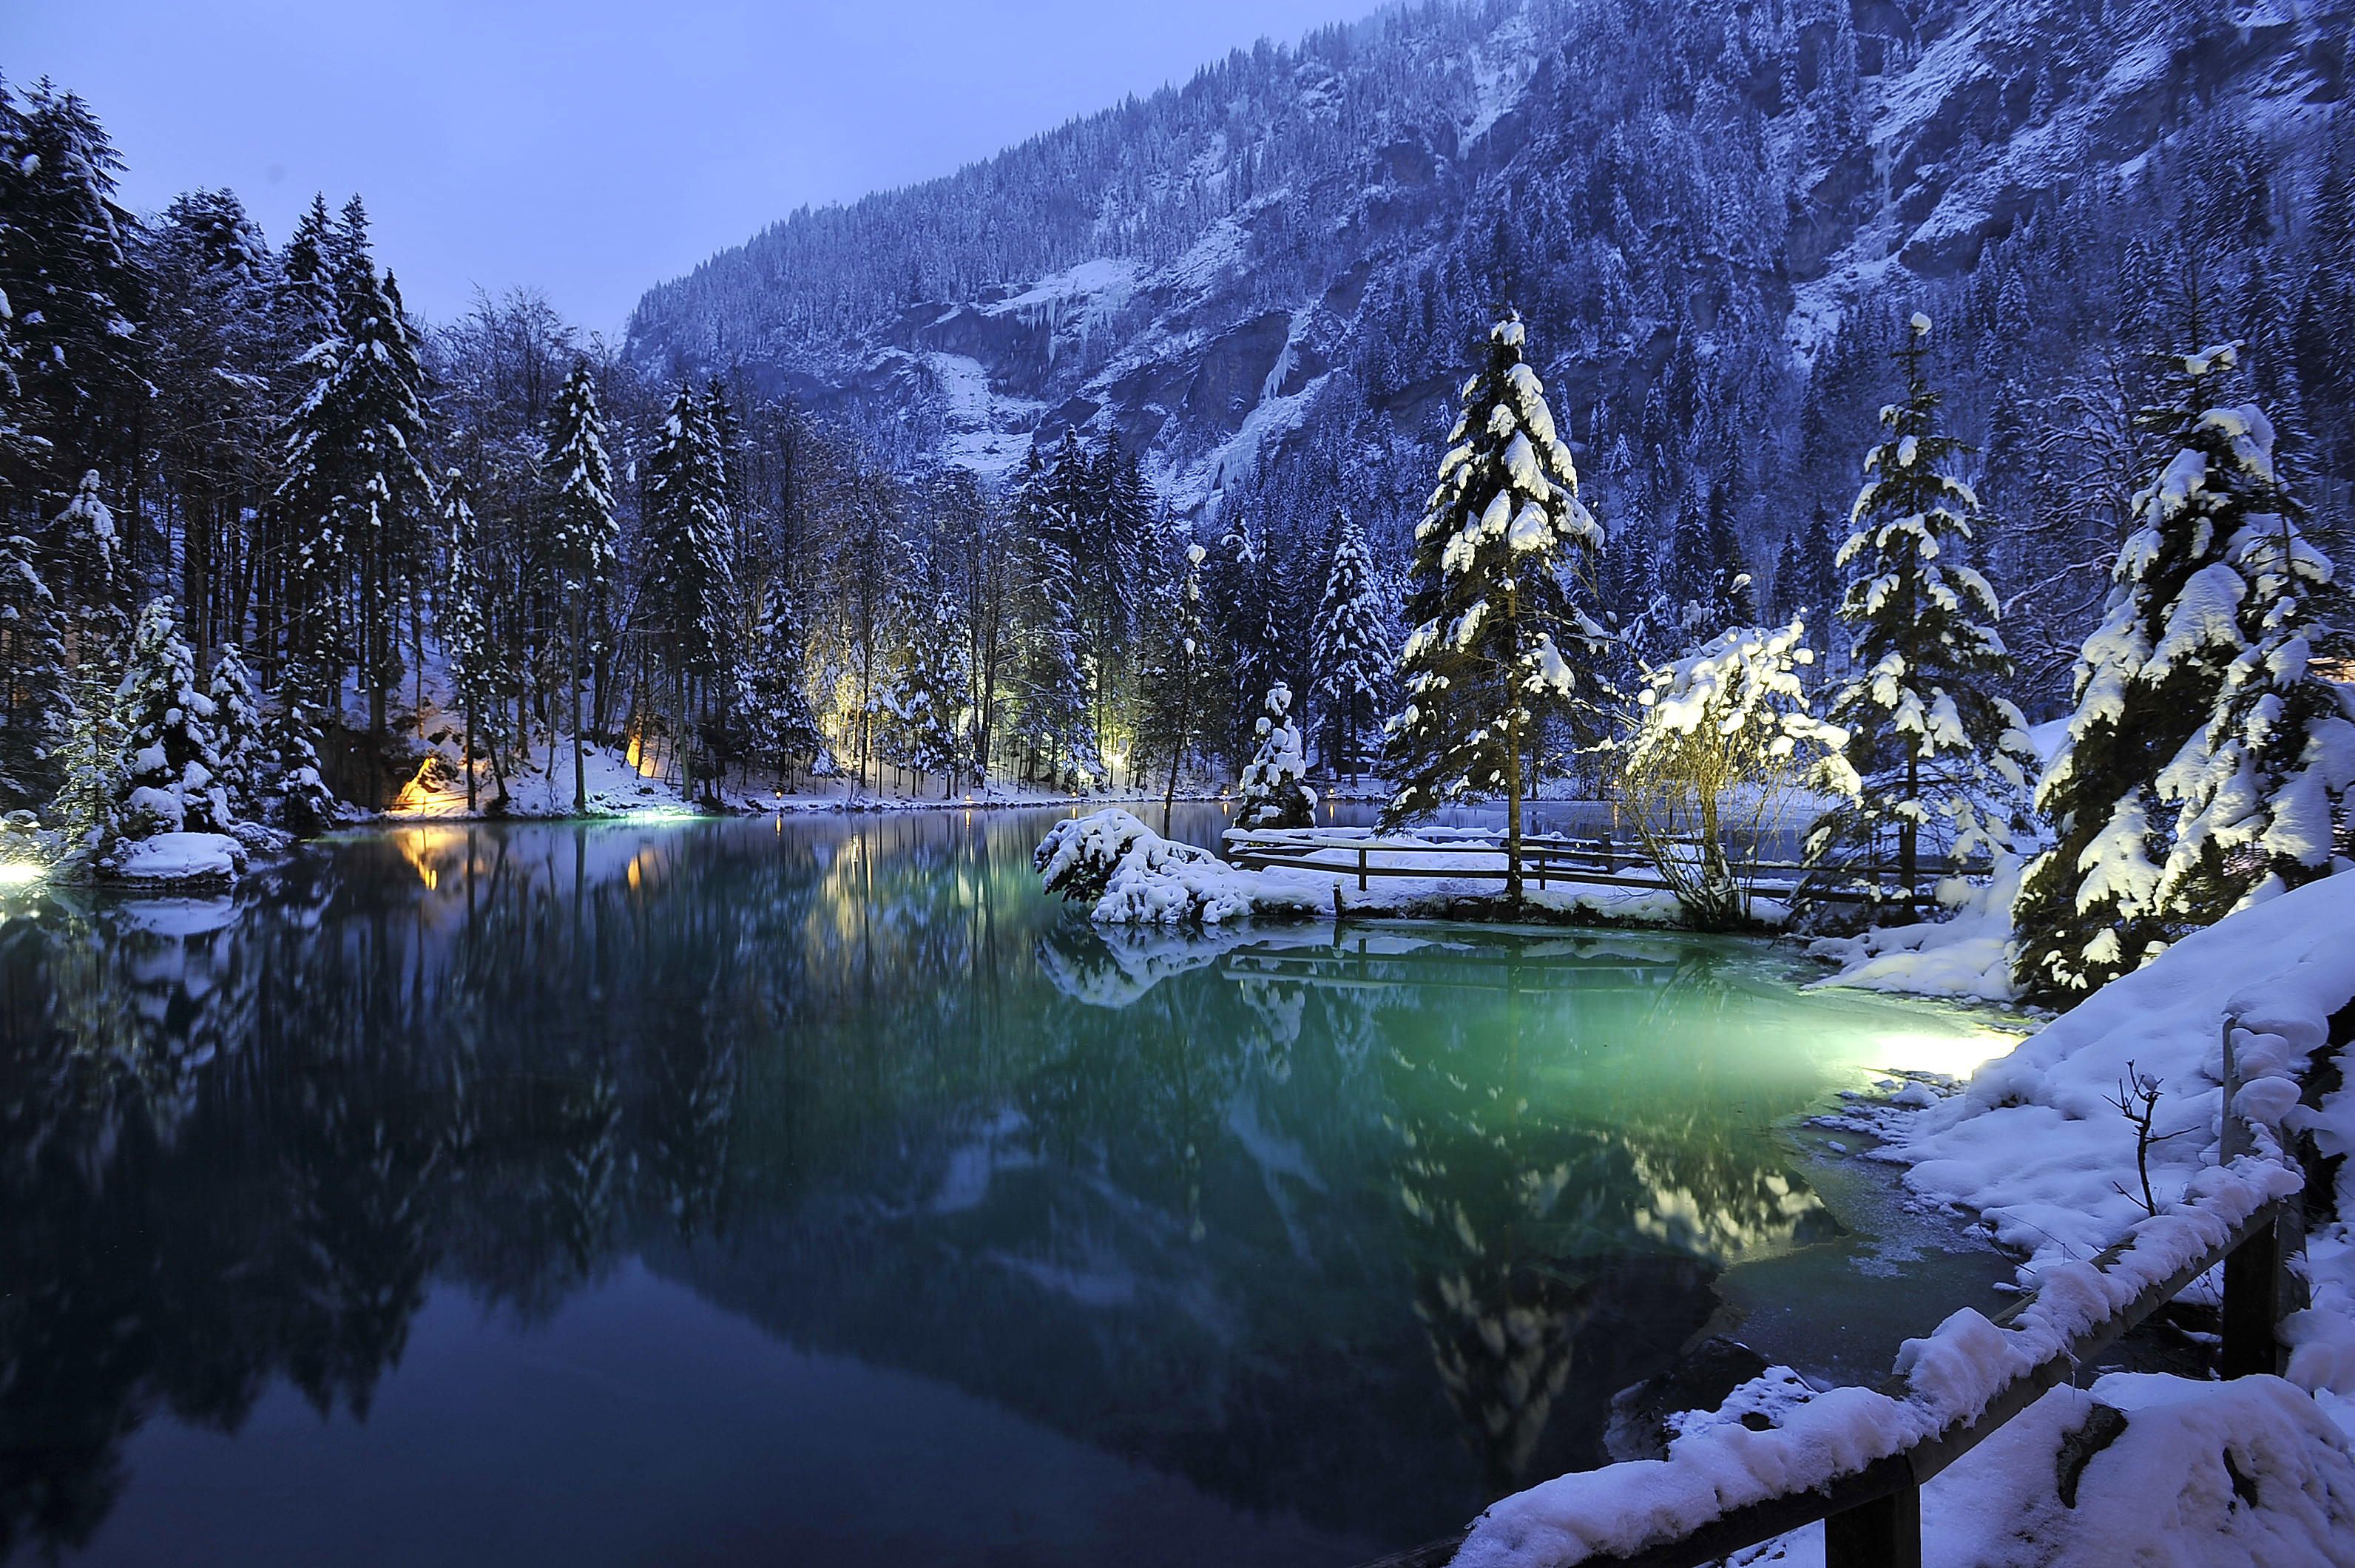 Photos for free The Blue Lake, Blausee, Switzerland the desktop